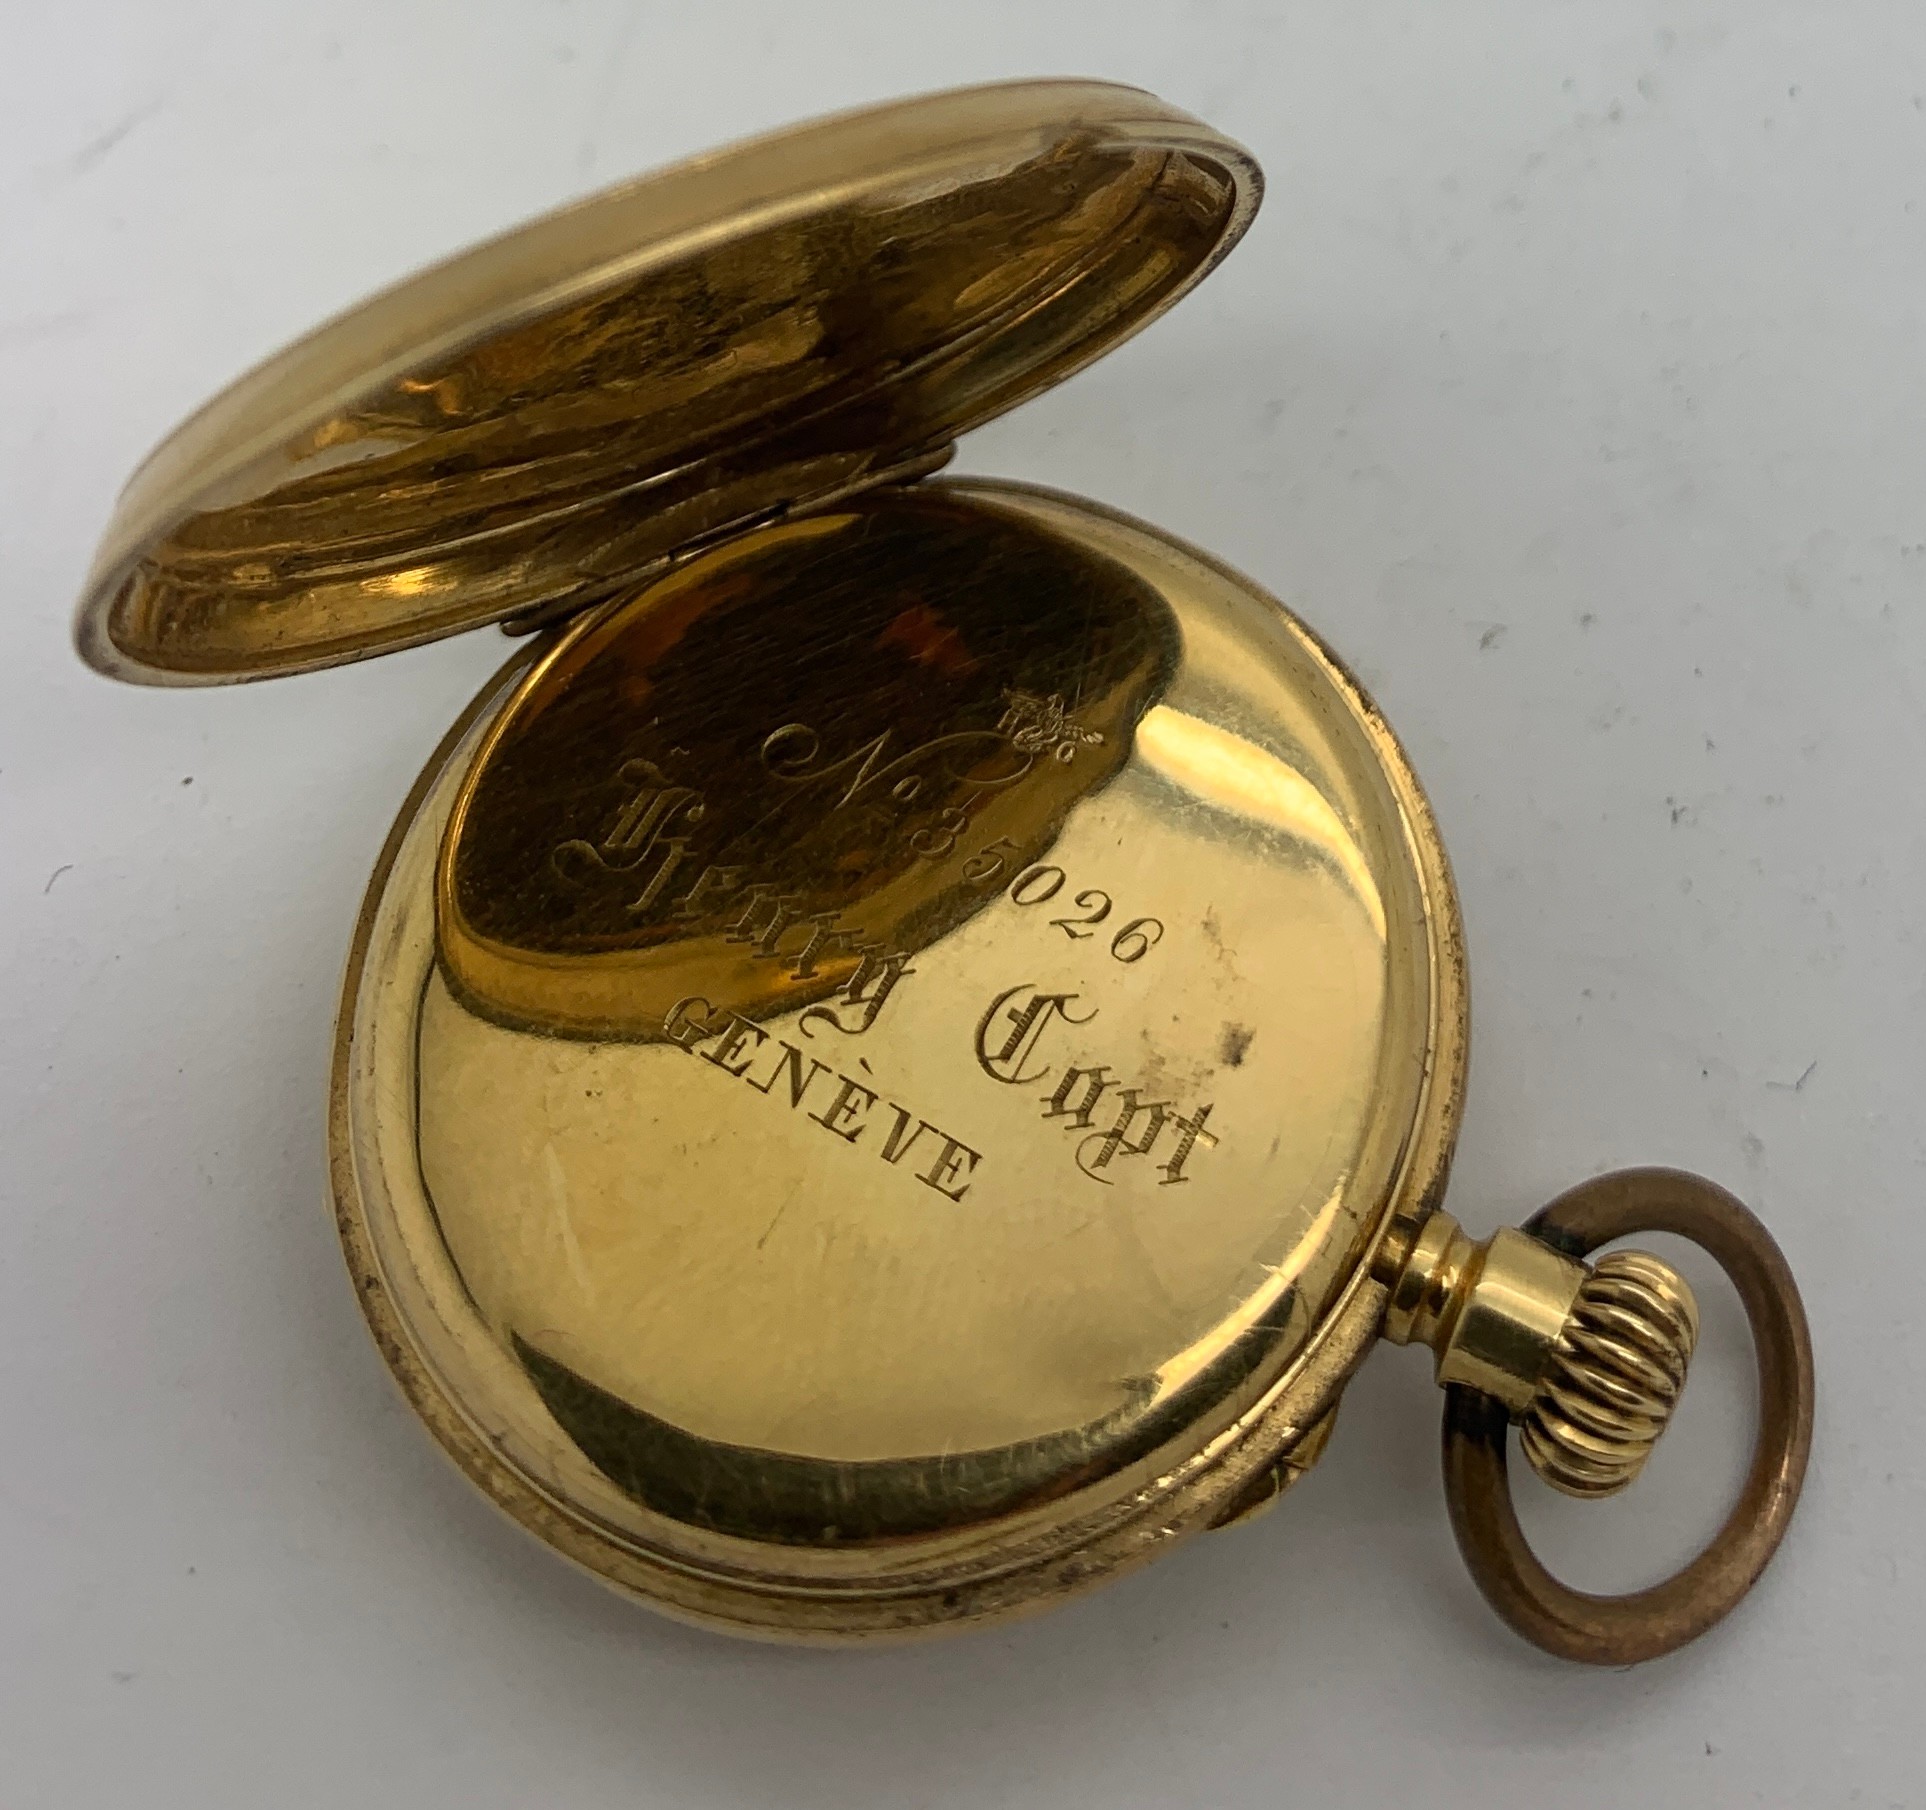 Ladies pocket watch by Henry Capt Geneve. case diameter approx. 33mms. weight 31.3gms - Image 3 of 4